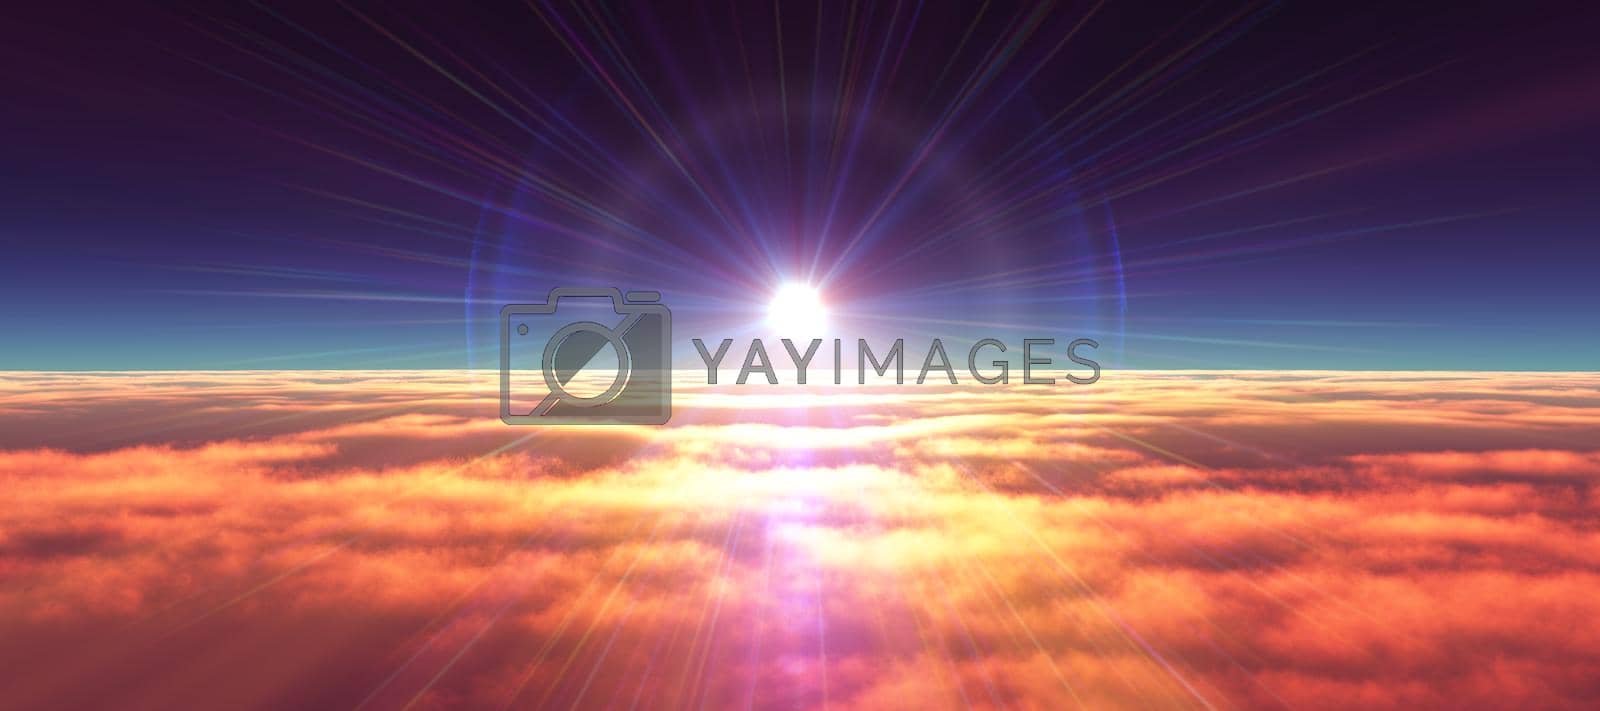 Royalty free image of above clouds fly sunset sun ray by alex_nako